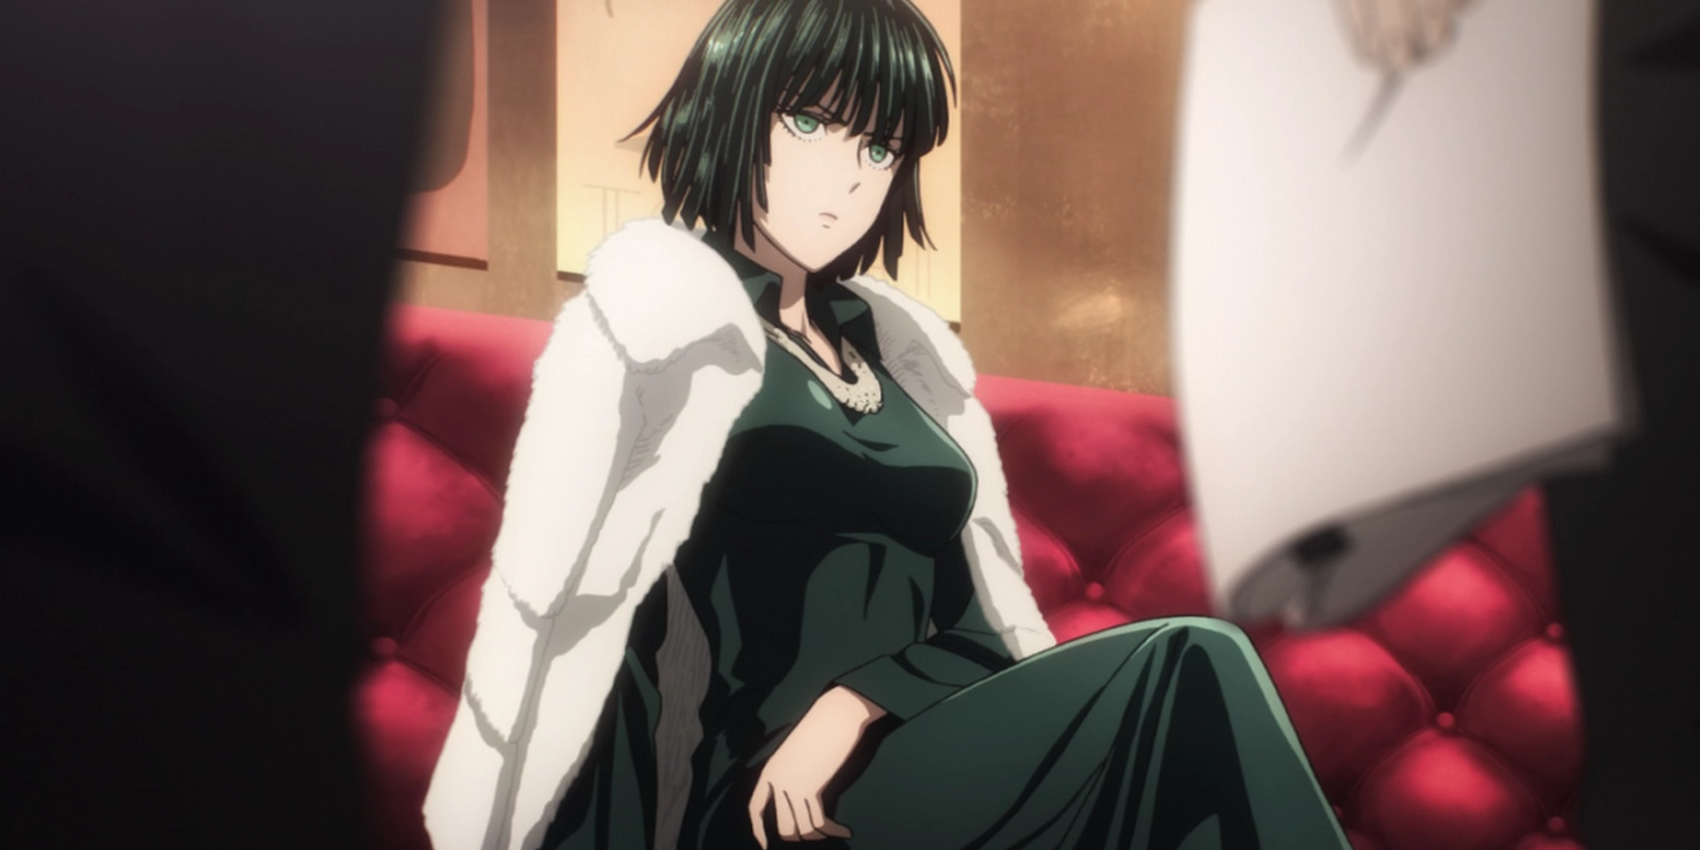 Fubuki seated on the couch in One Punch Man